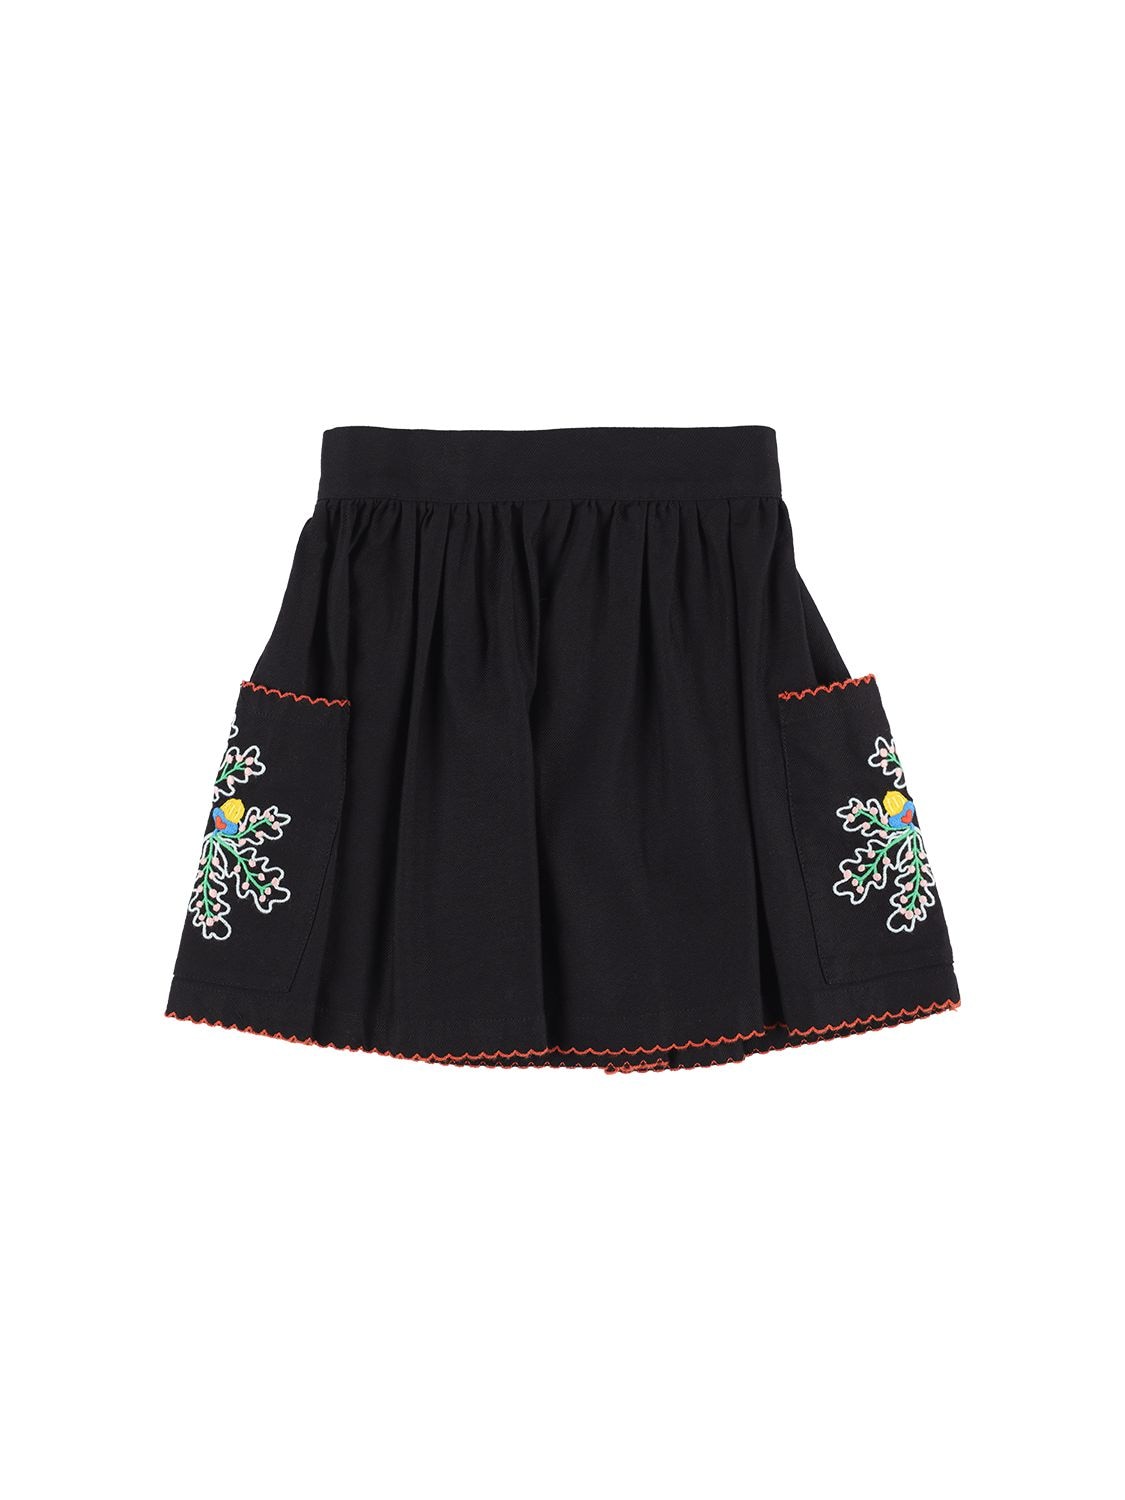 Image of Embroidered Organic Cotton Skirt